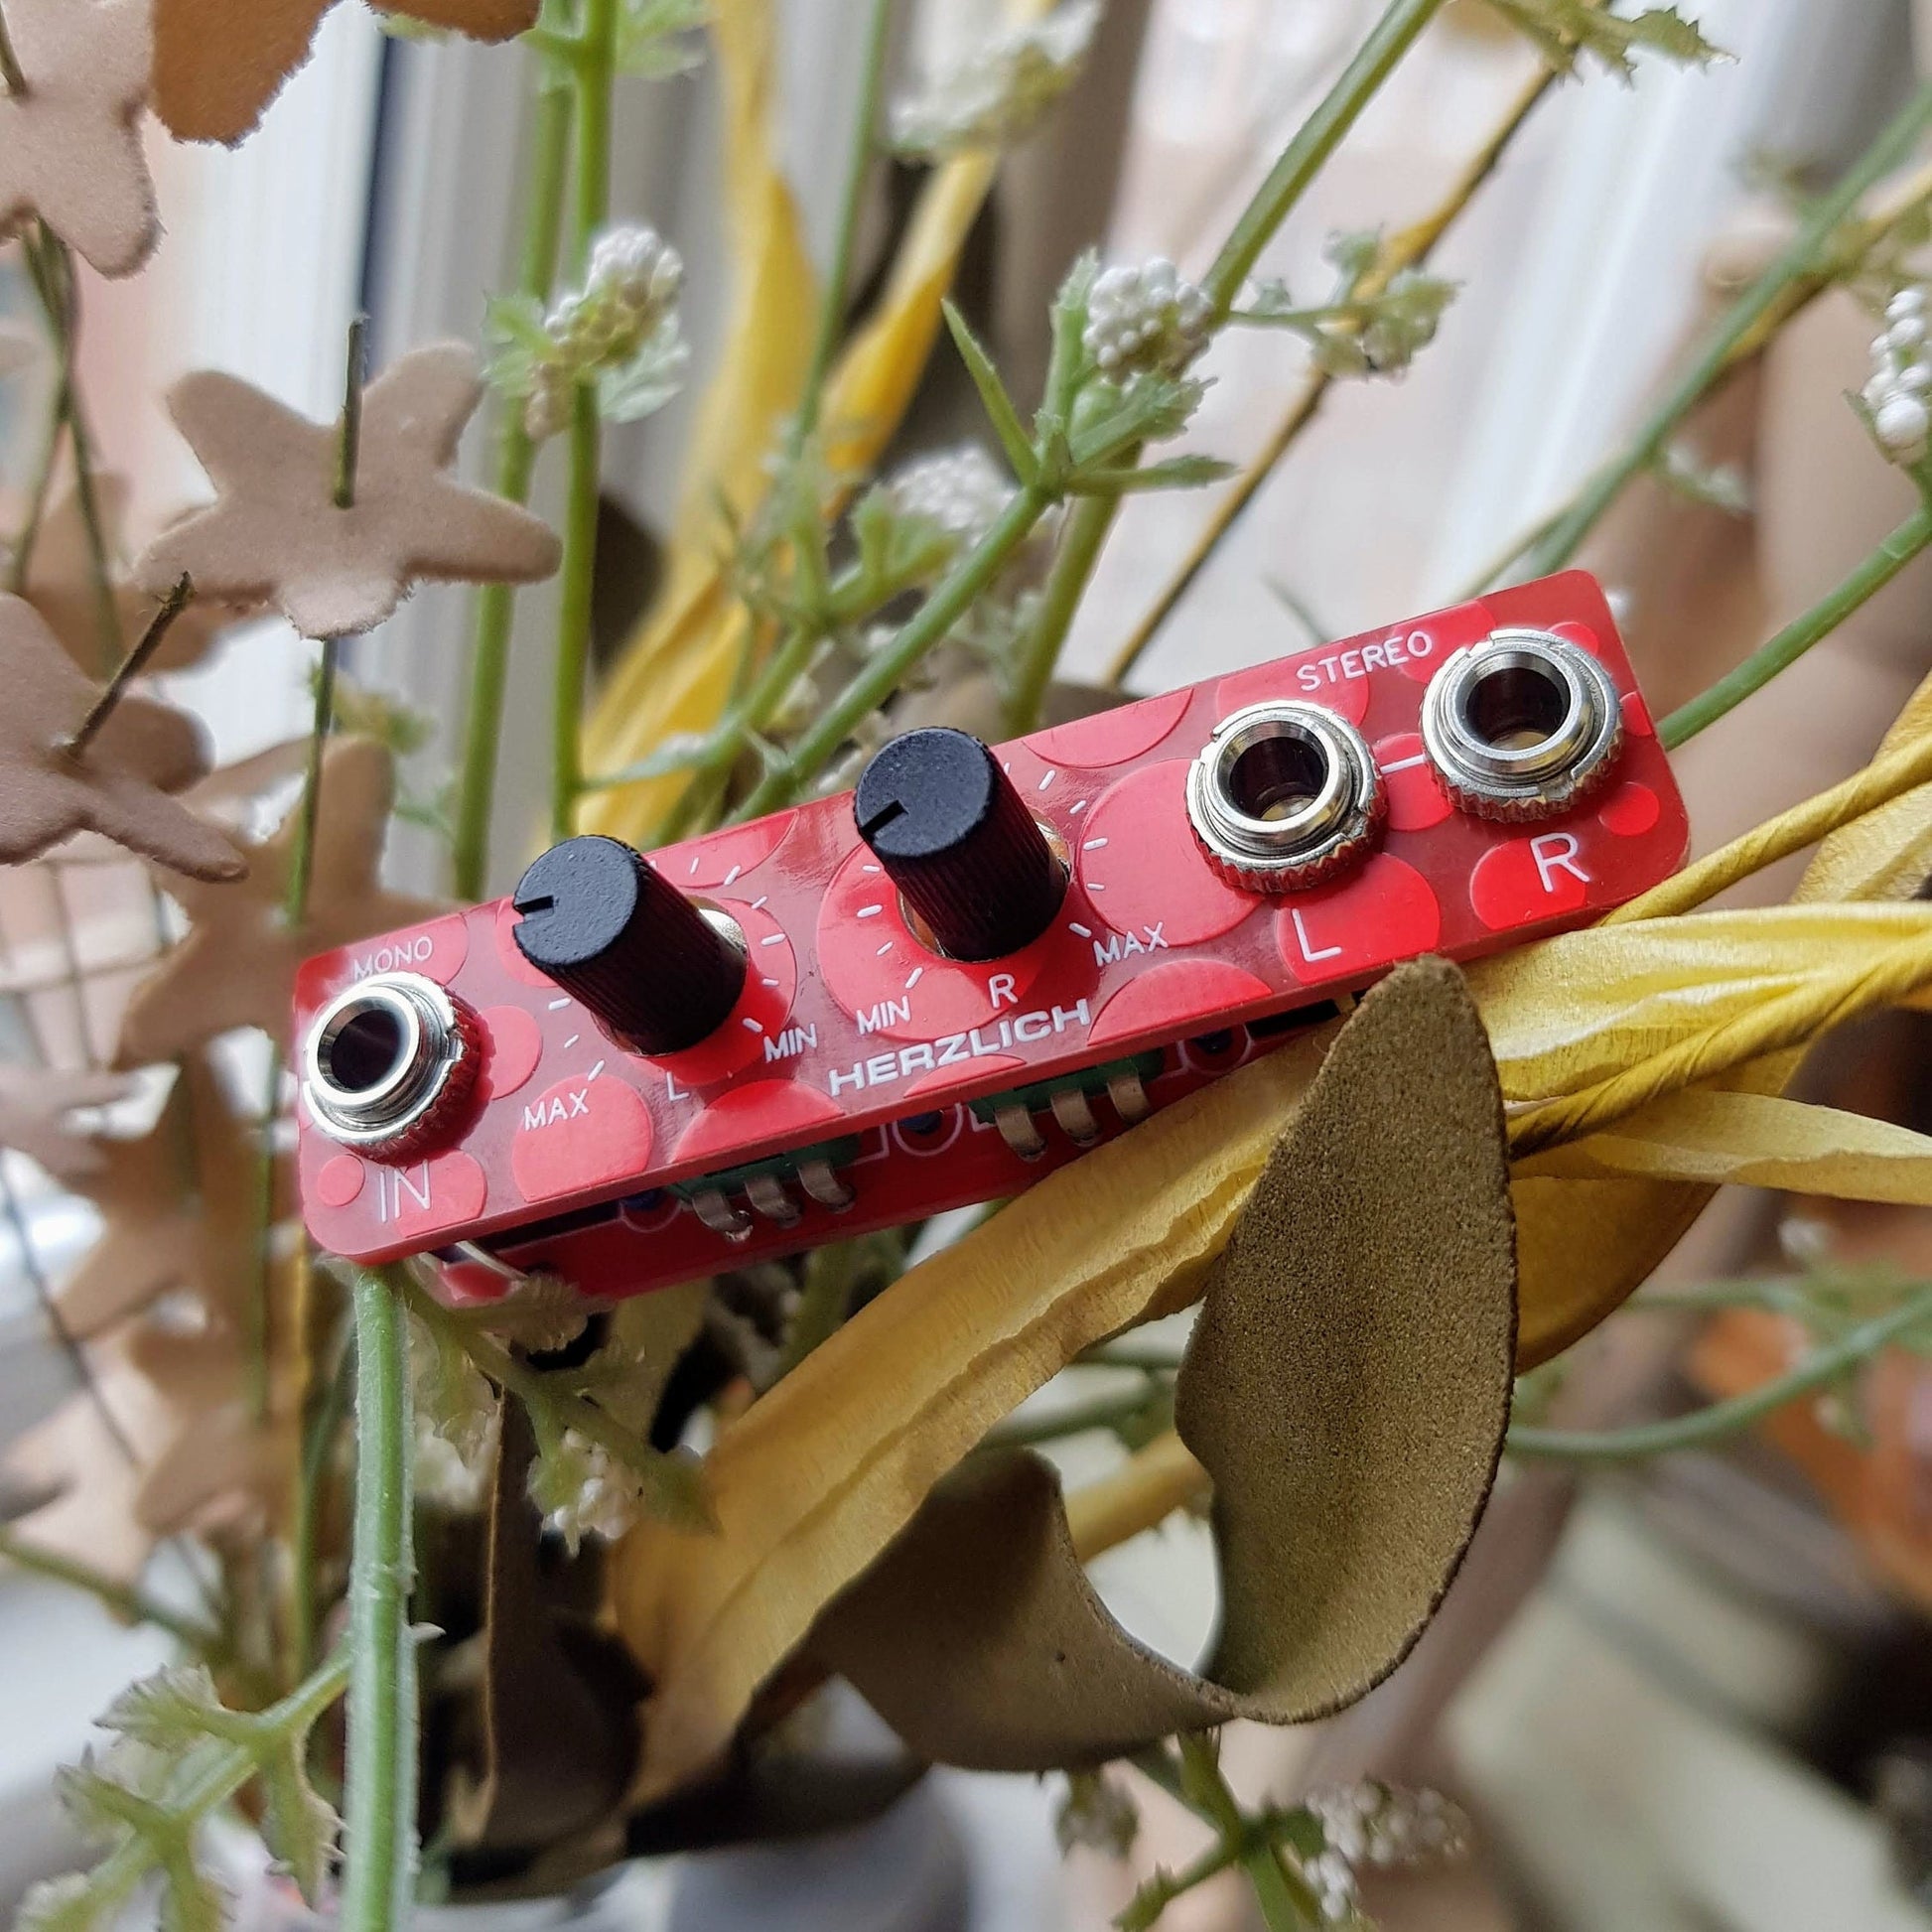 Stereo Panner 0HP - Herzlich Lateral - passive panning stereoizer module for modular synths, Eurorack and semi-modular